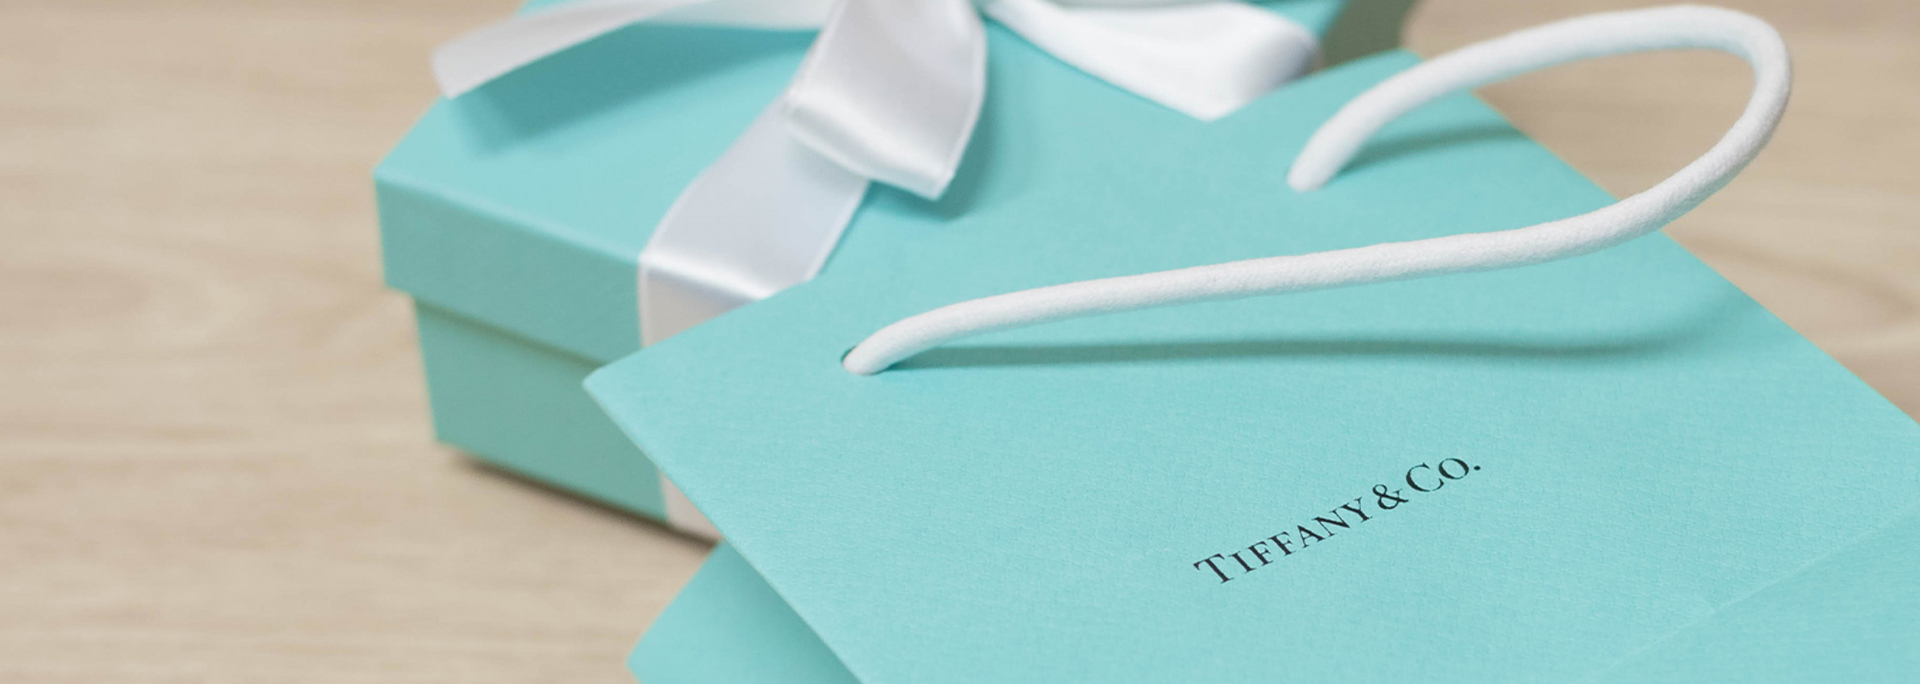 Picture of Tiffany's jewellery packaging.